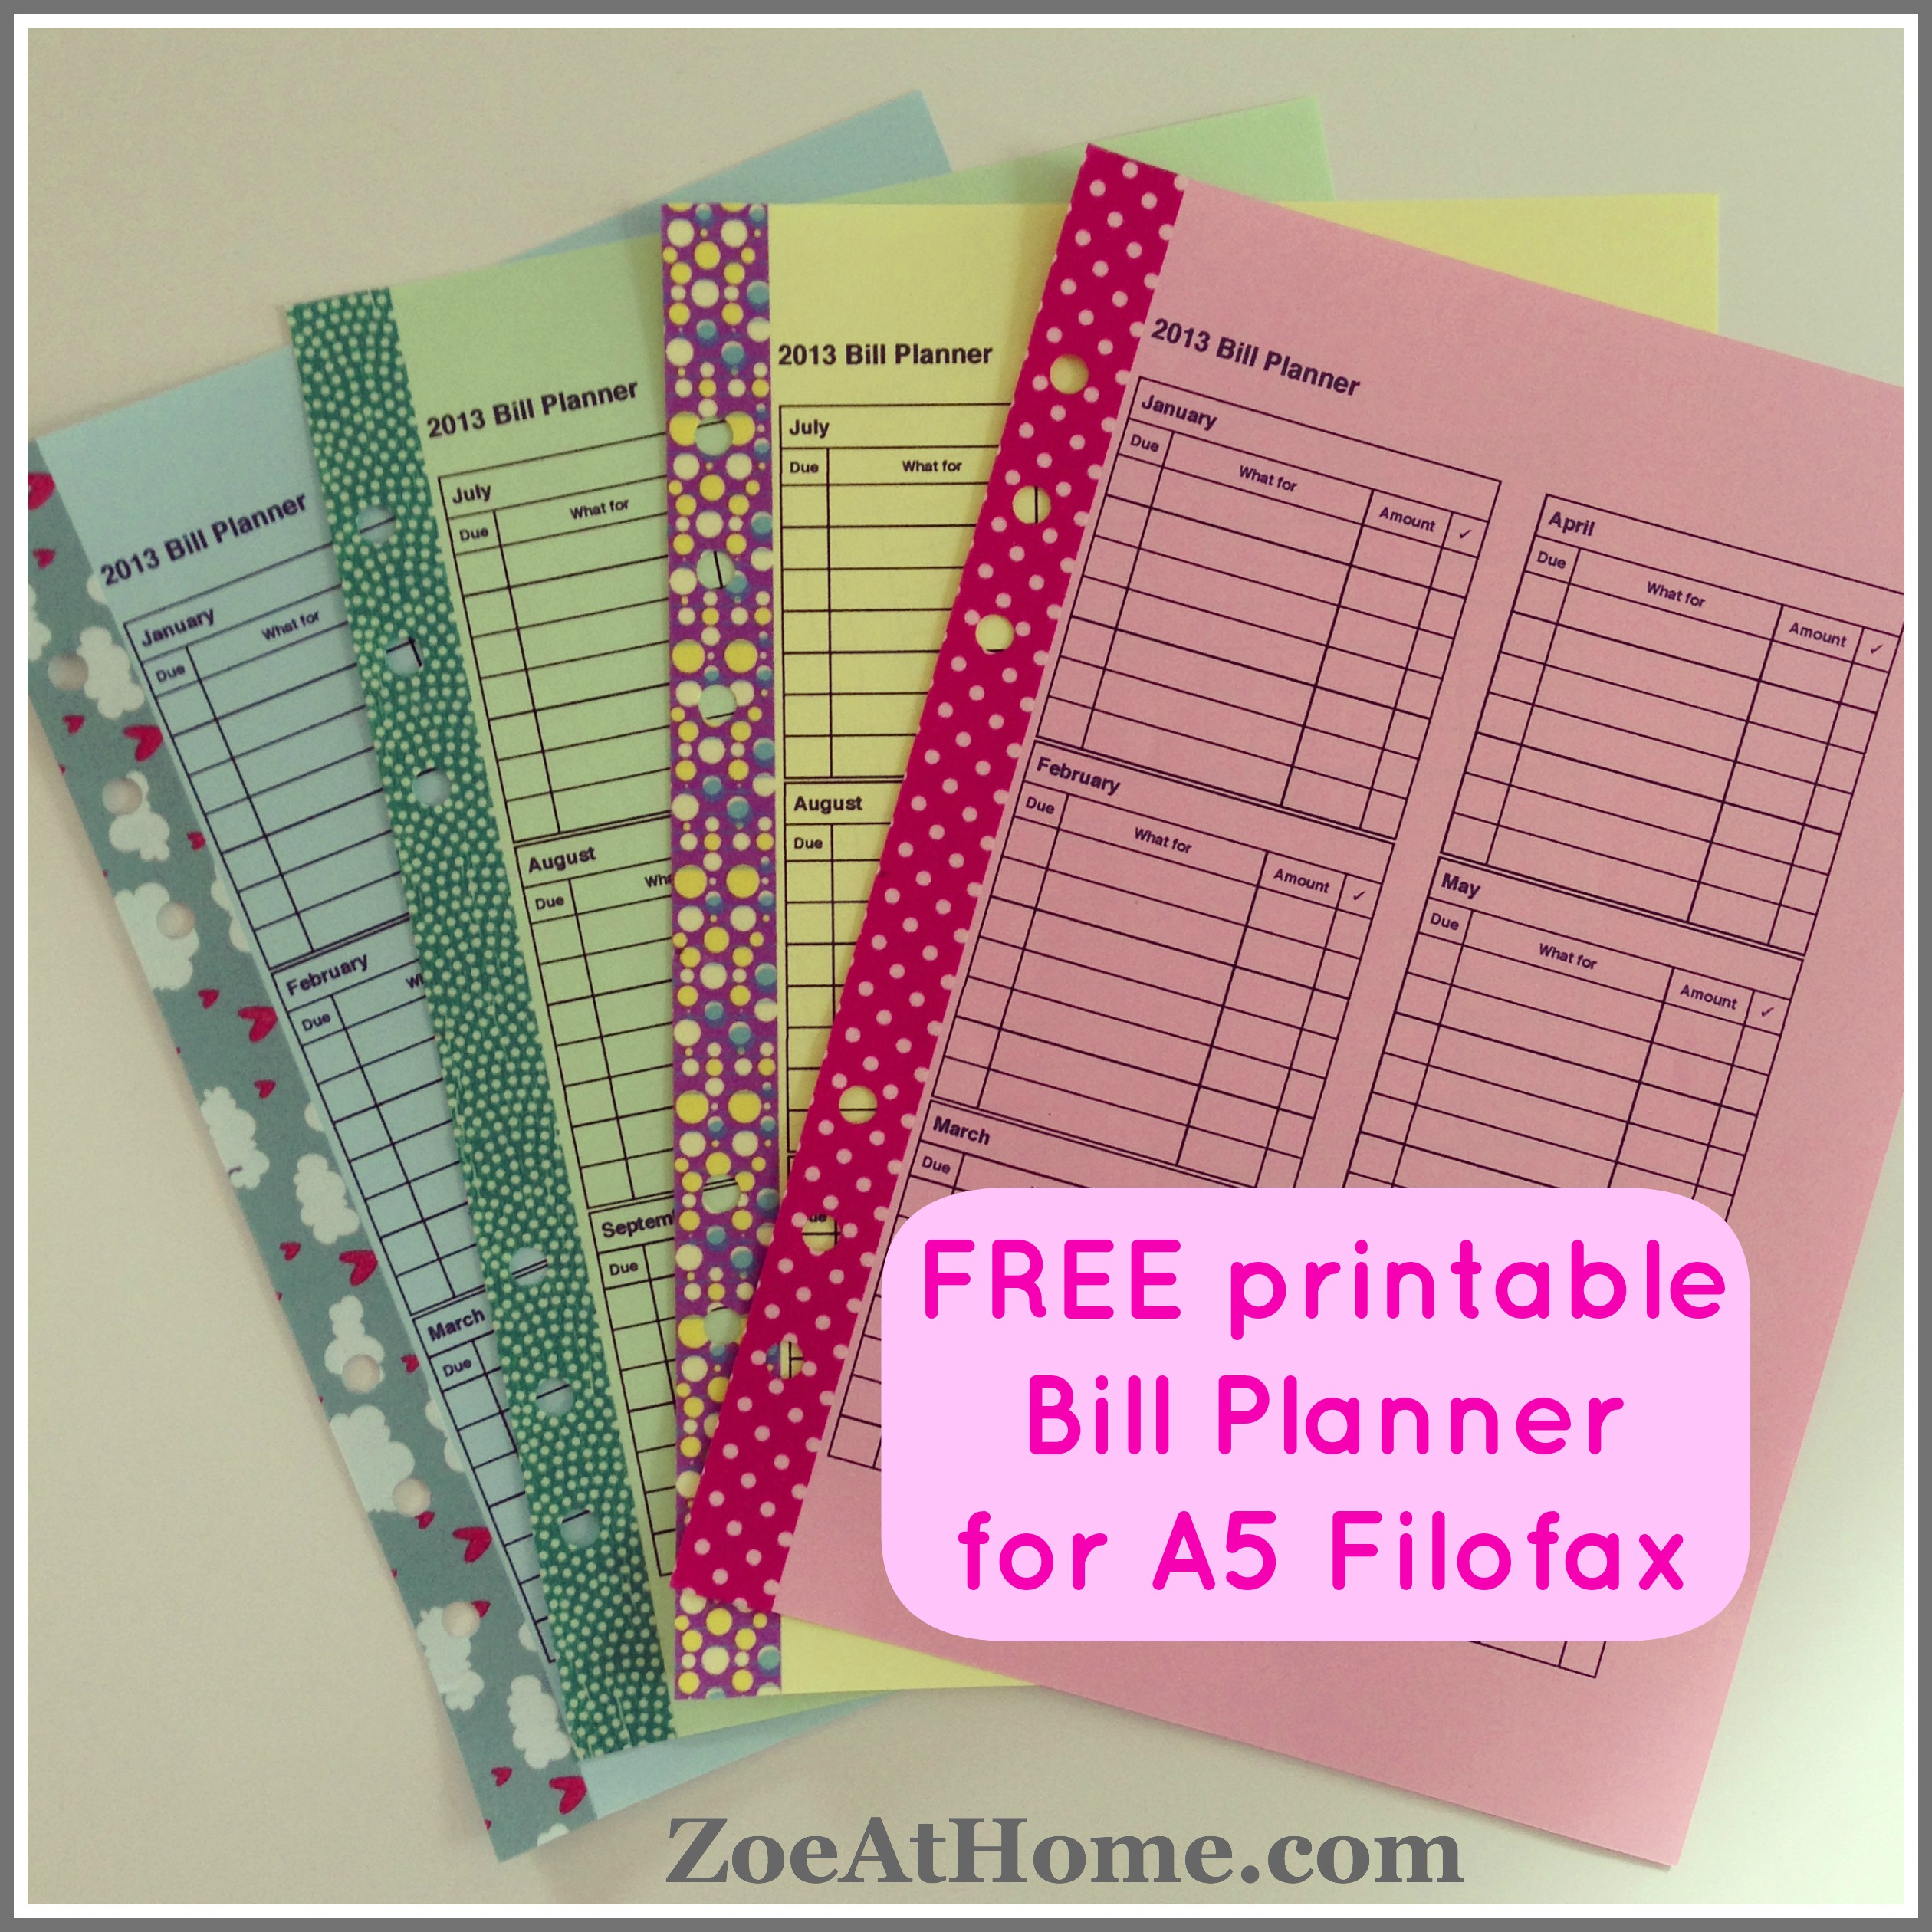 9-best-images-of-budget-filofax-printables-filofax-a5-printable-bill-planner-2016-a5